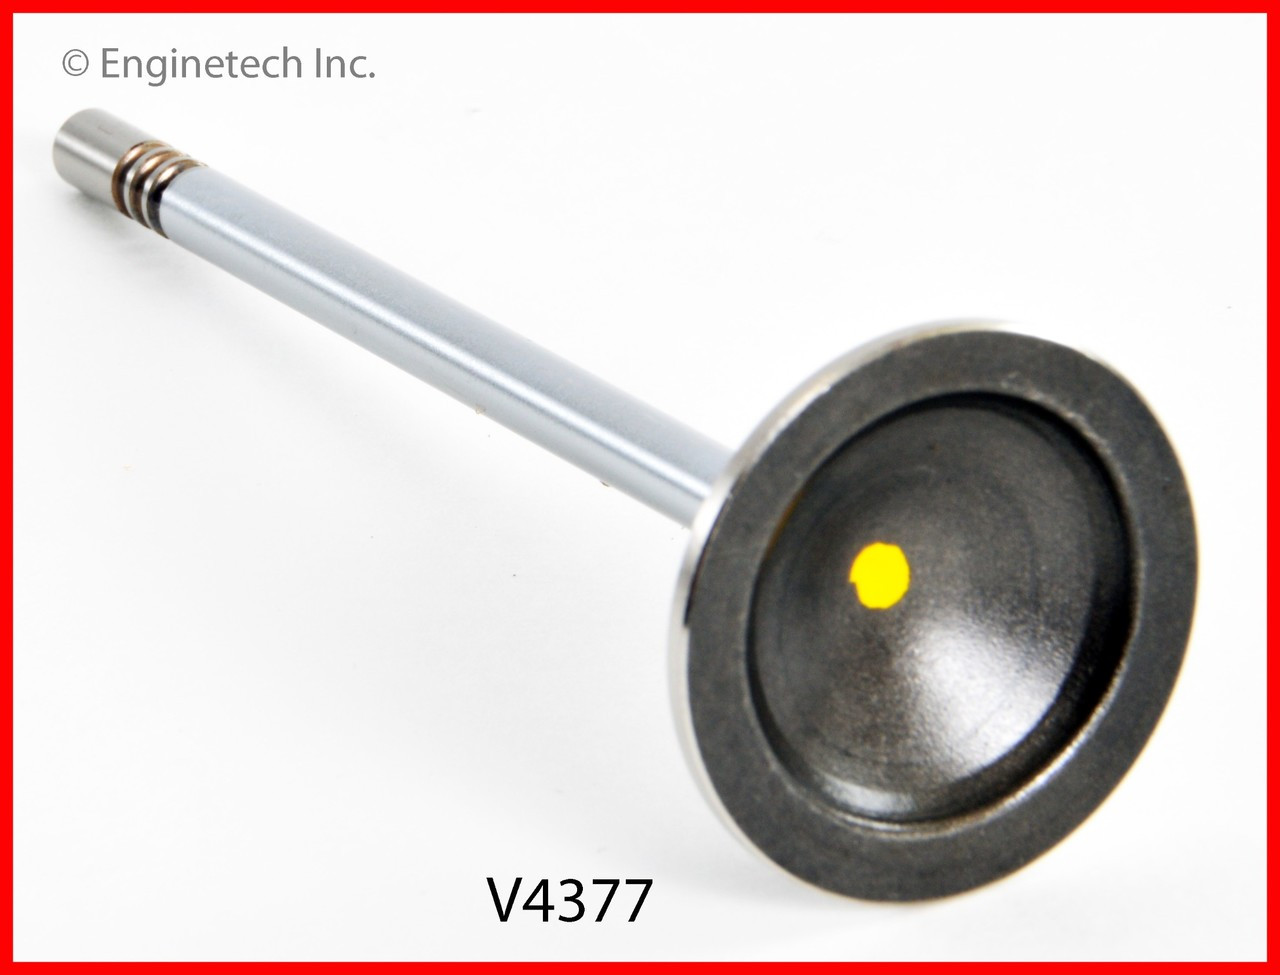 Exhaust Valve - 2012 Ford Expedition 5.4L (V4377.I87)